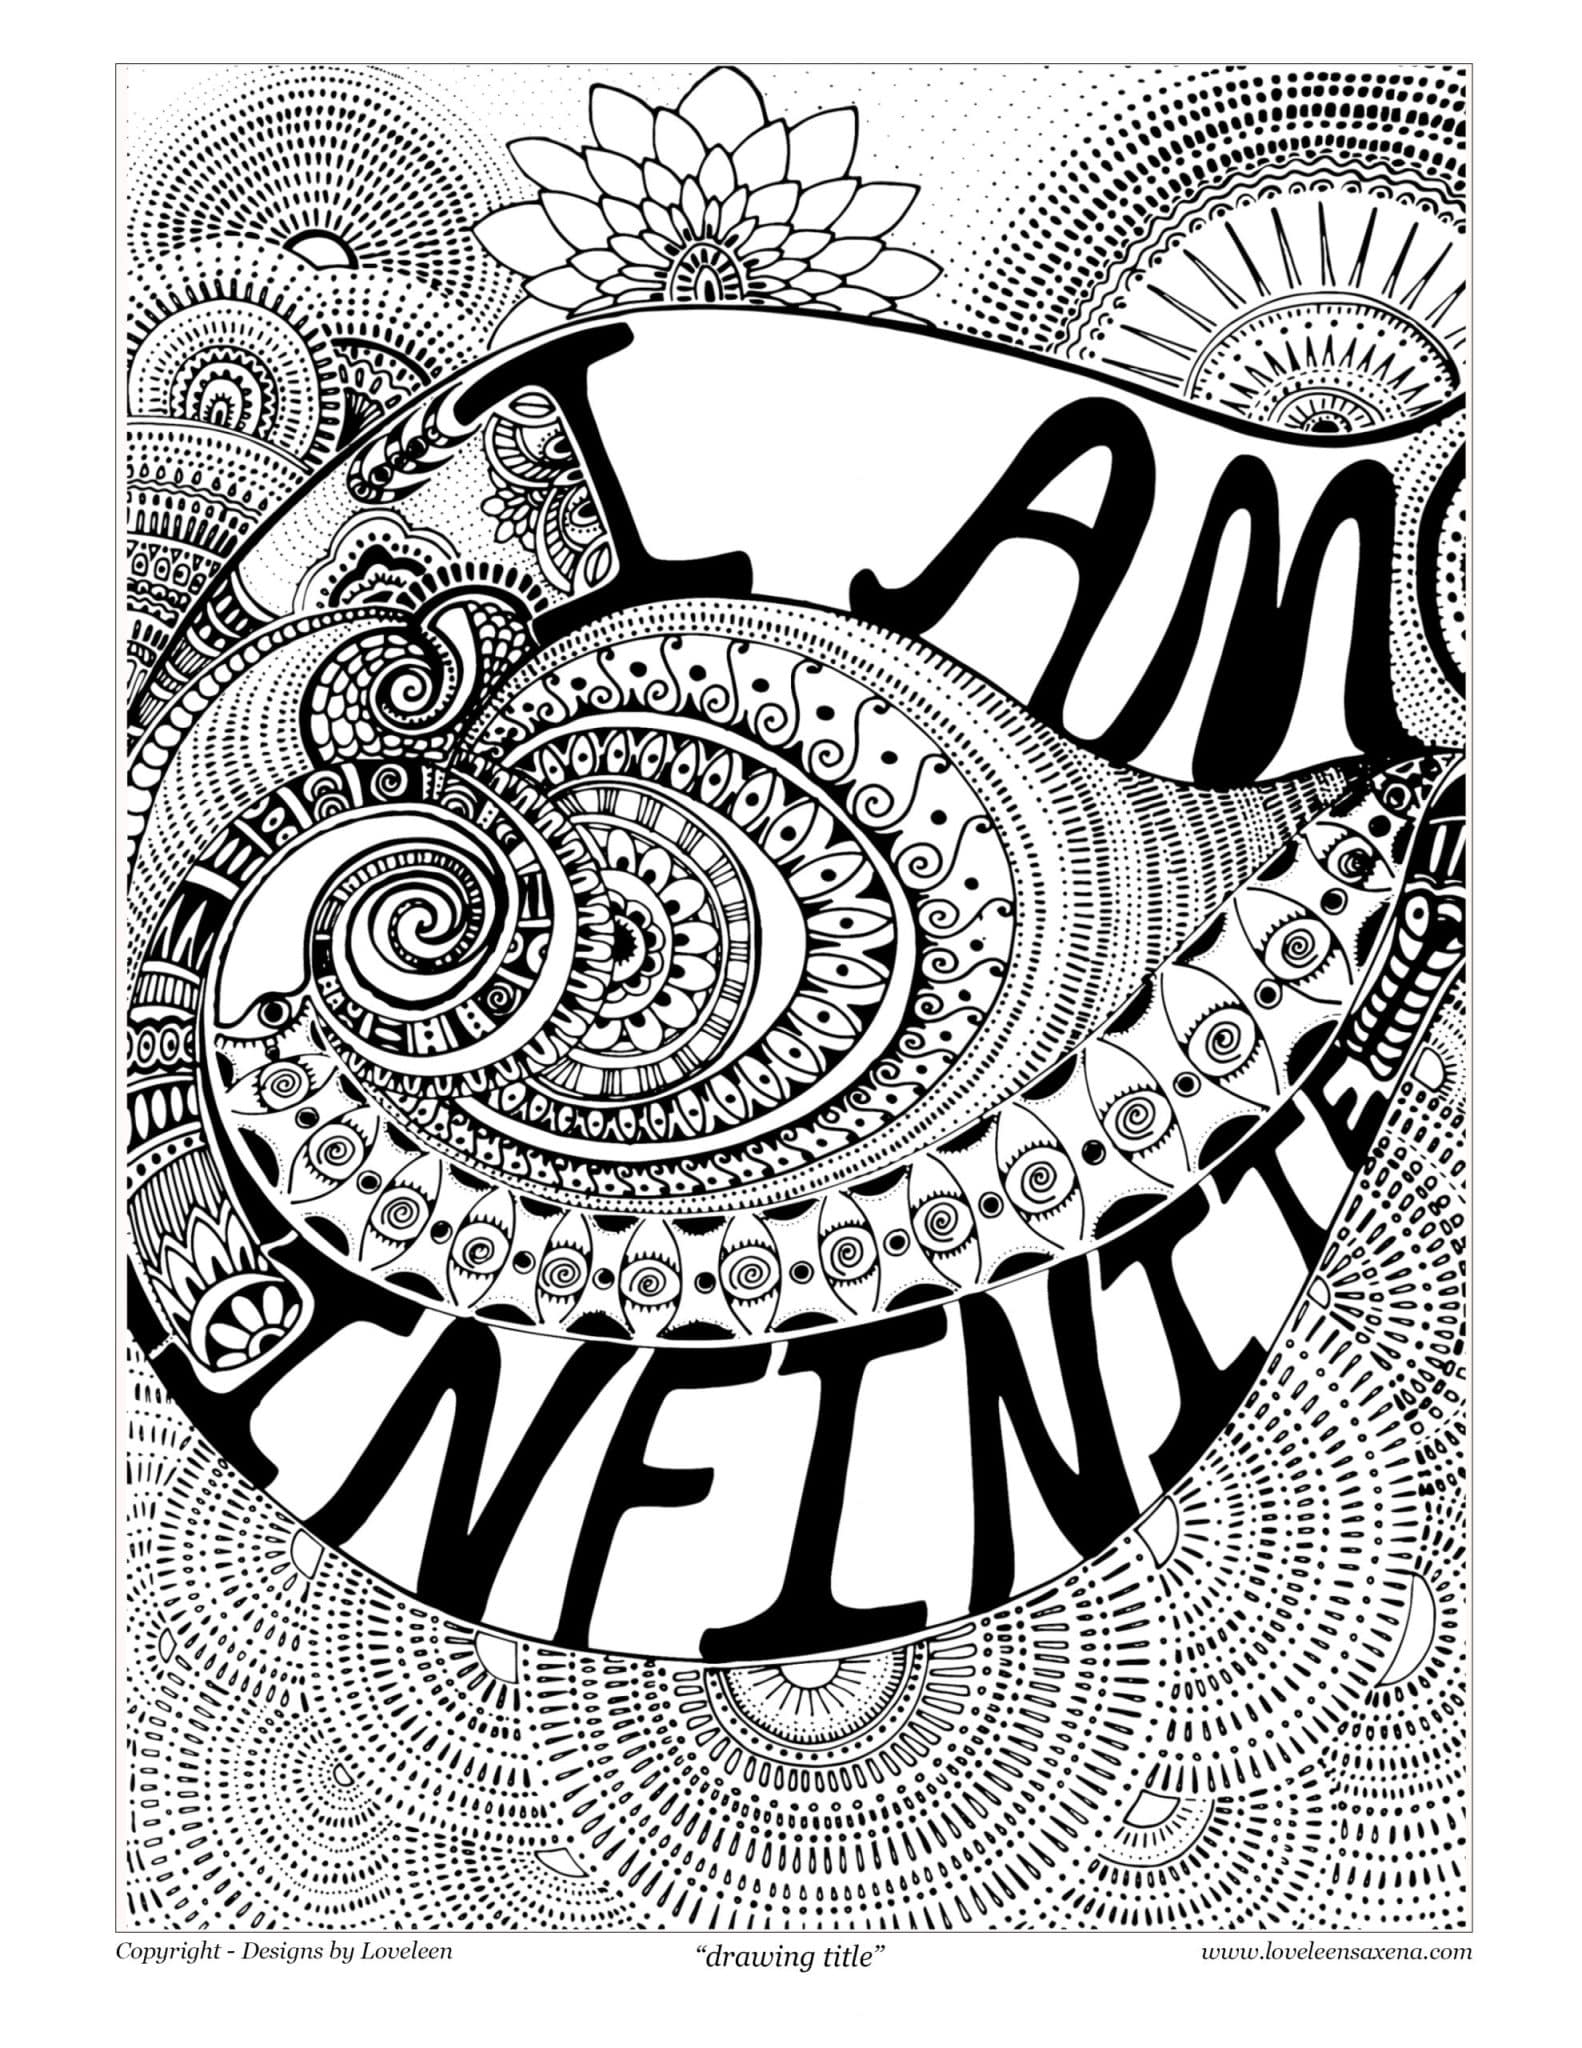 Coloring page - I am infinite